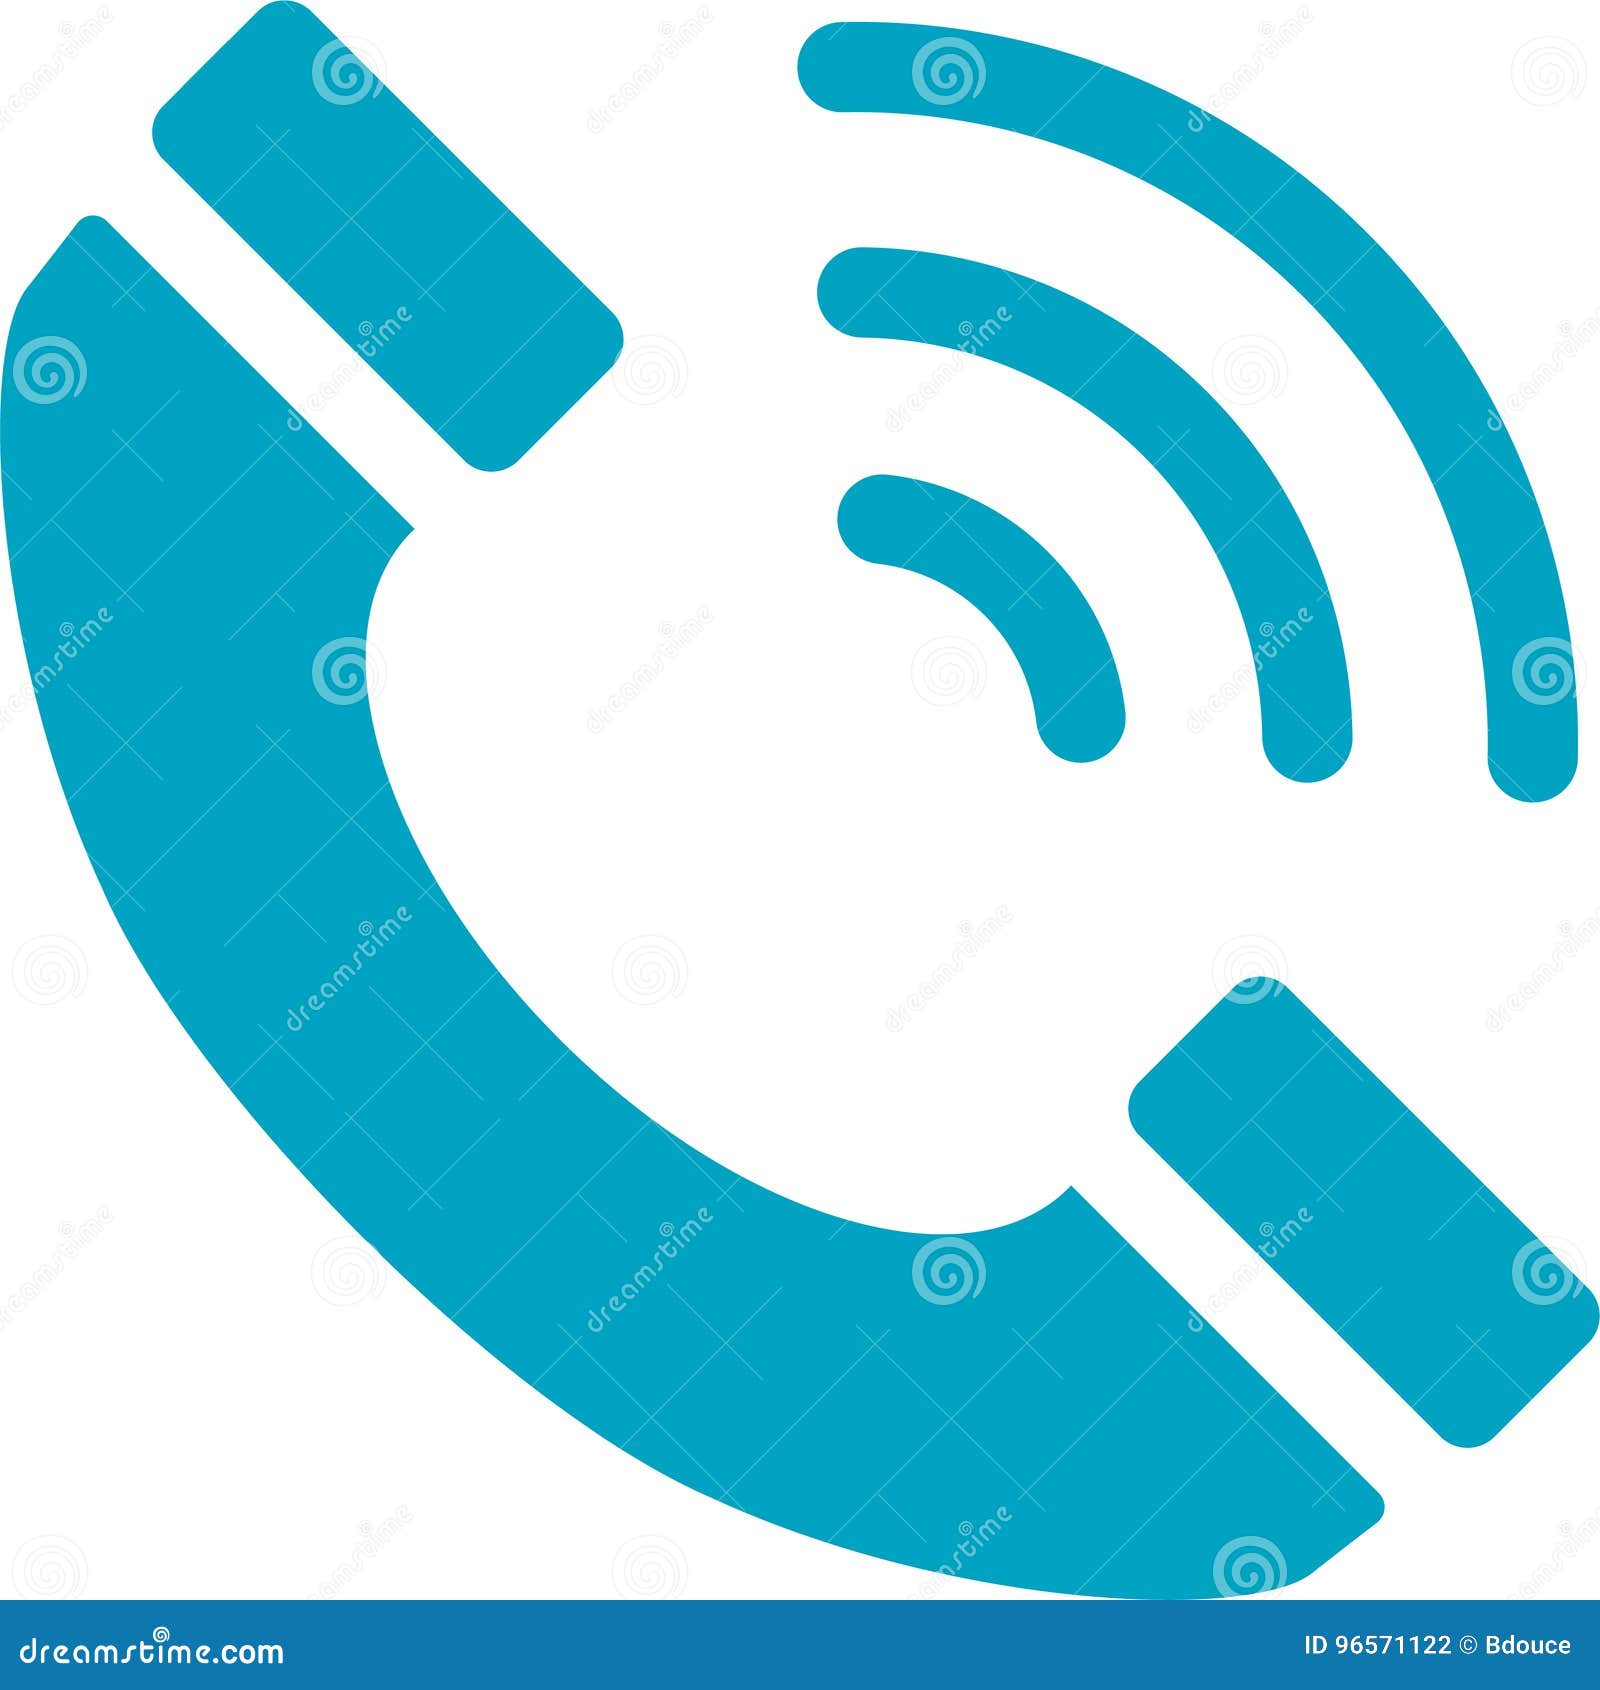 Premium Vector | Ringing phone icon old telephone handle with sound symbol  isolated on white background